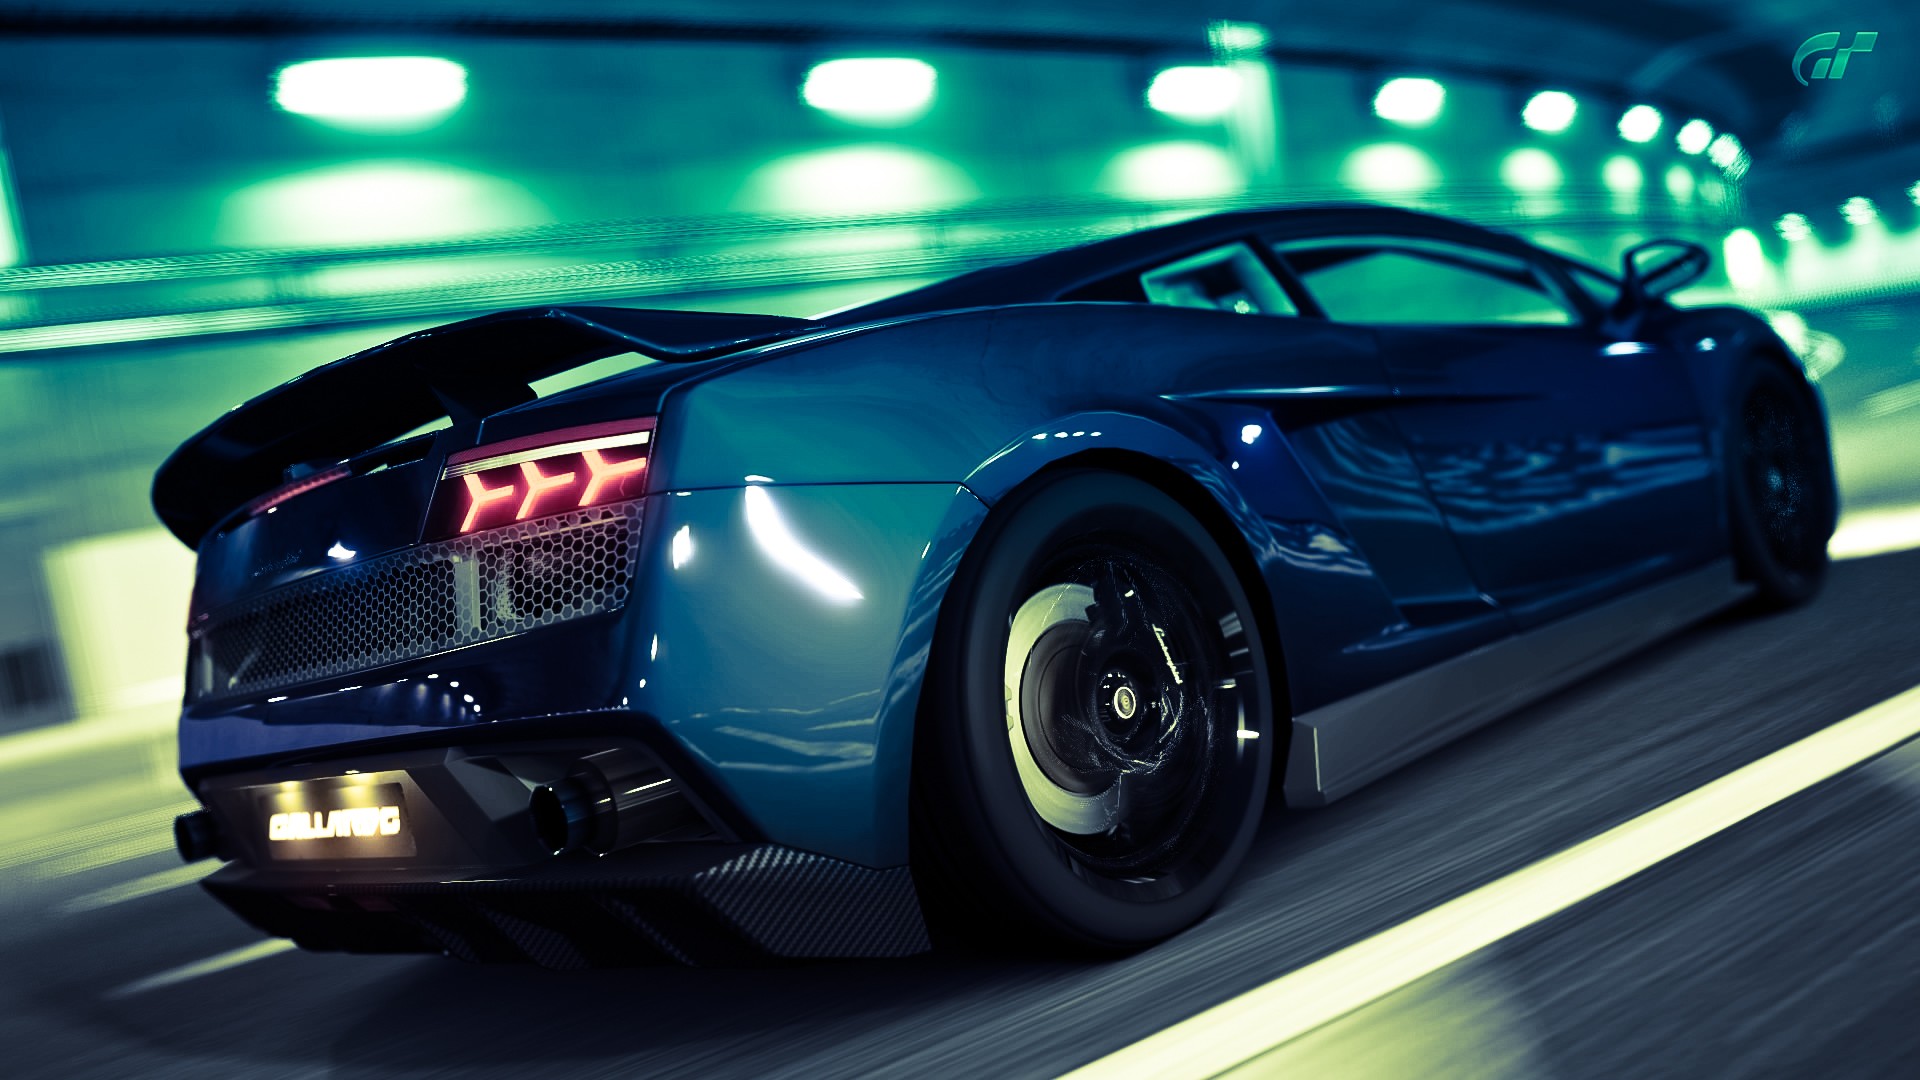 wallpaper car moving Fast moving cars hd wallpapers for pc